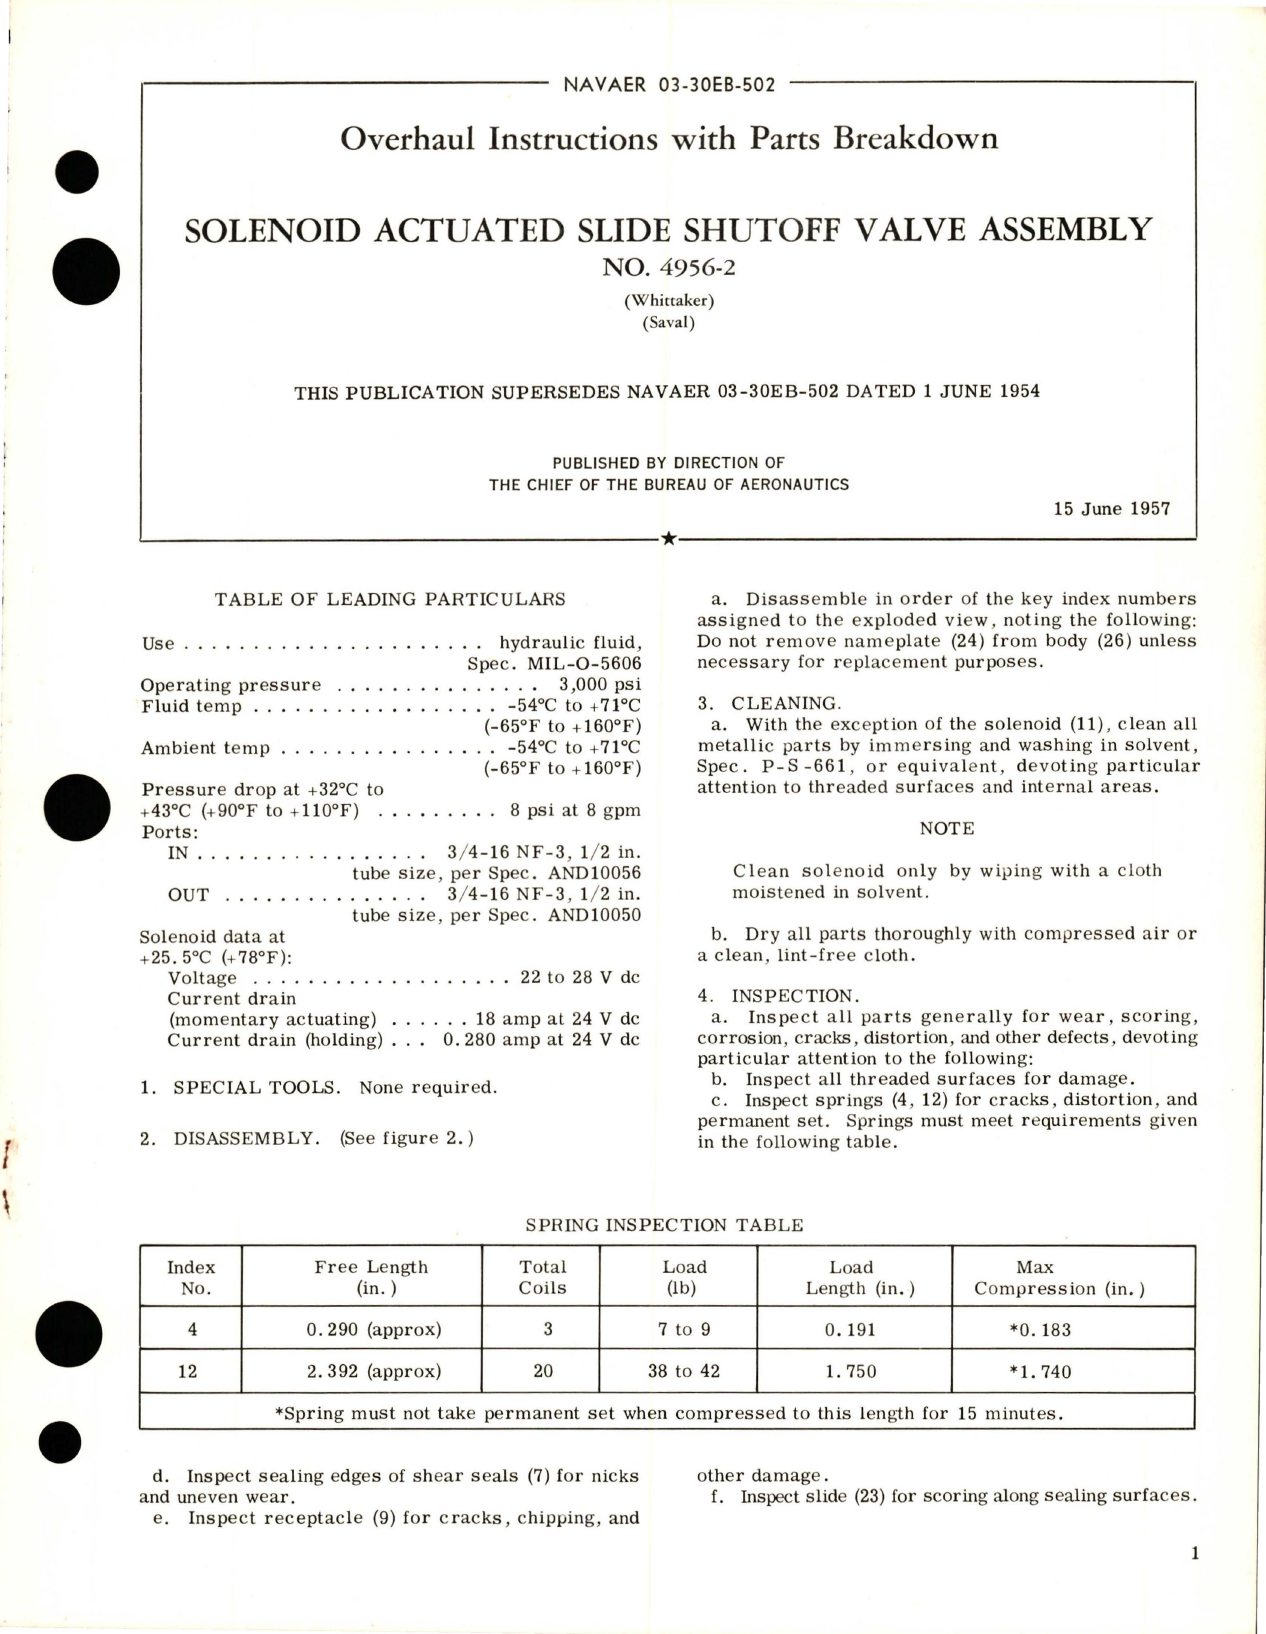 Sample page 1 from AirCorps Library document: Overhaul Instructions with Parts Breakdown for Solenoid Actuated Slide Shutoff Valve Assembly - 4956-2 